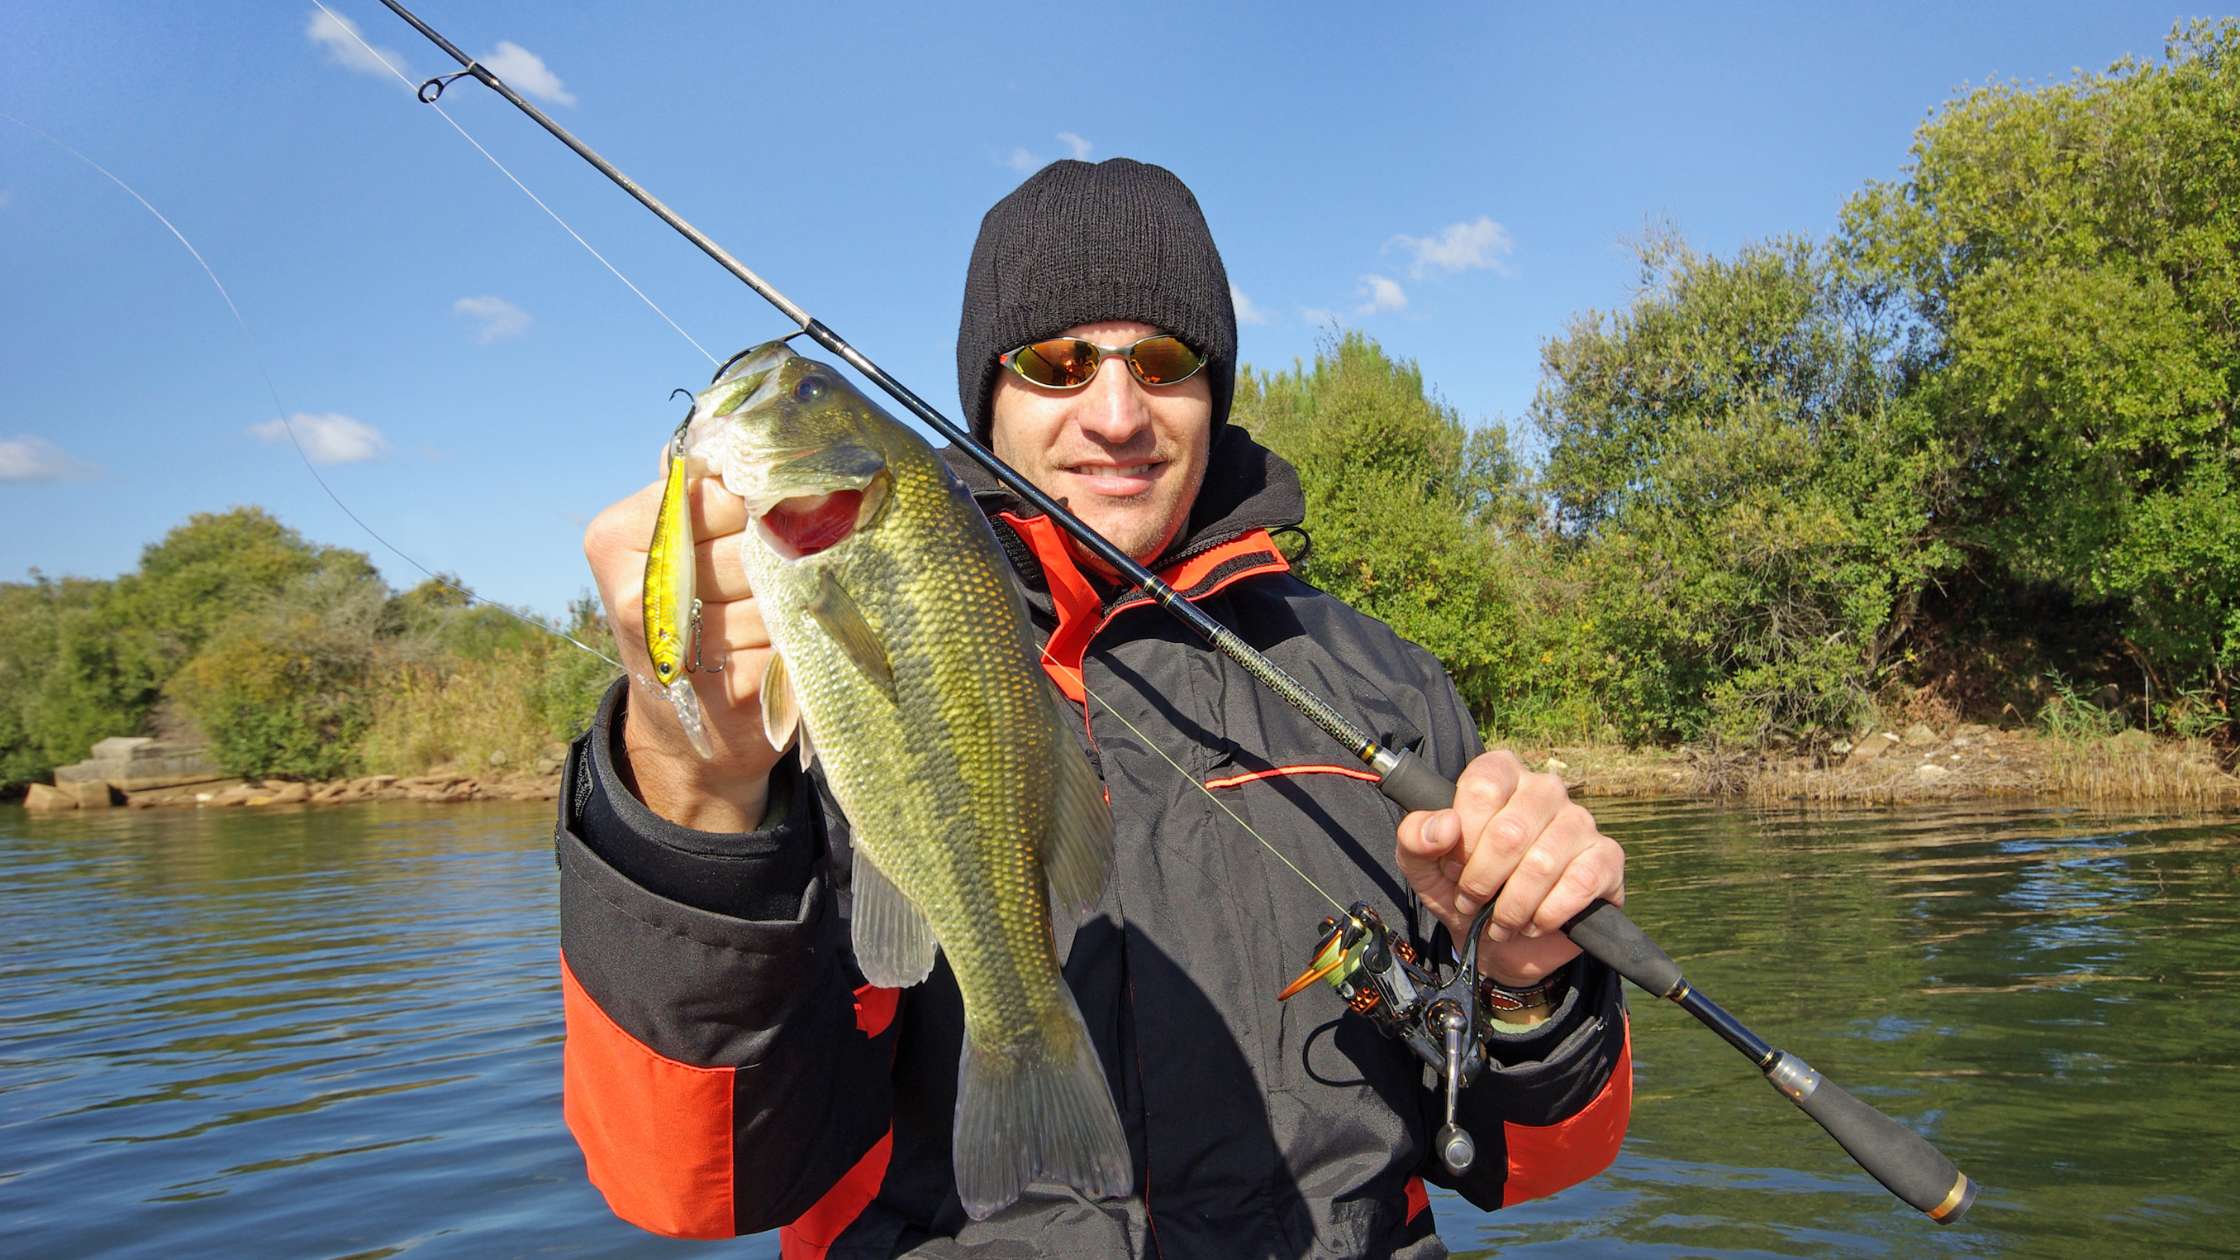 Freshwater Fishing Tips and Techniques